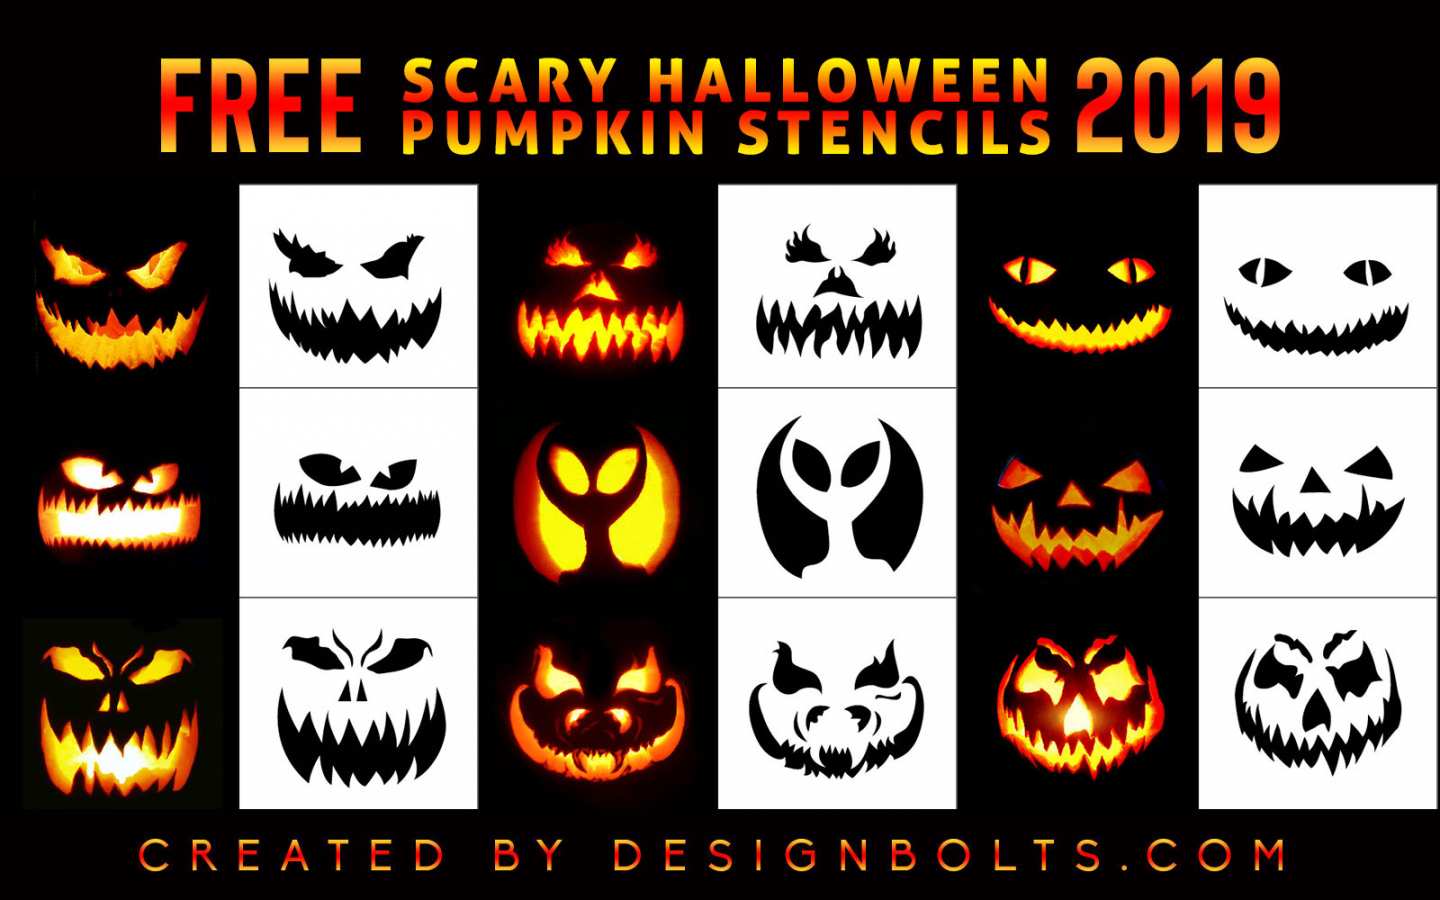 Free Scary Halloween Pumpkin Carving Stencils, Faces, Templates